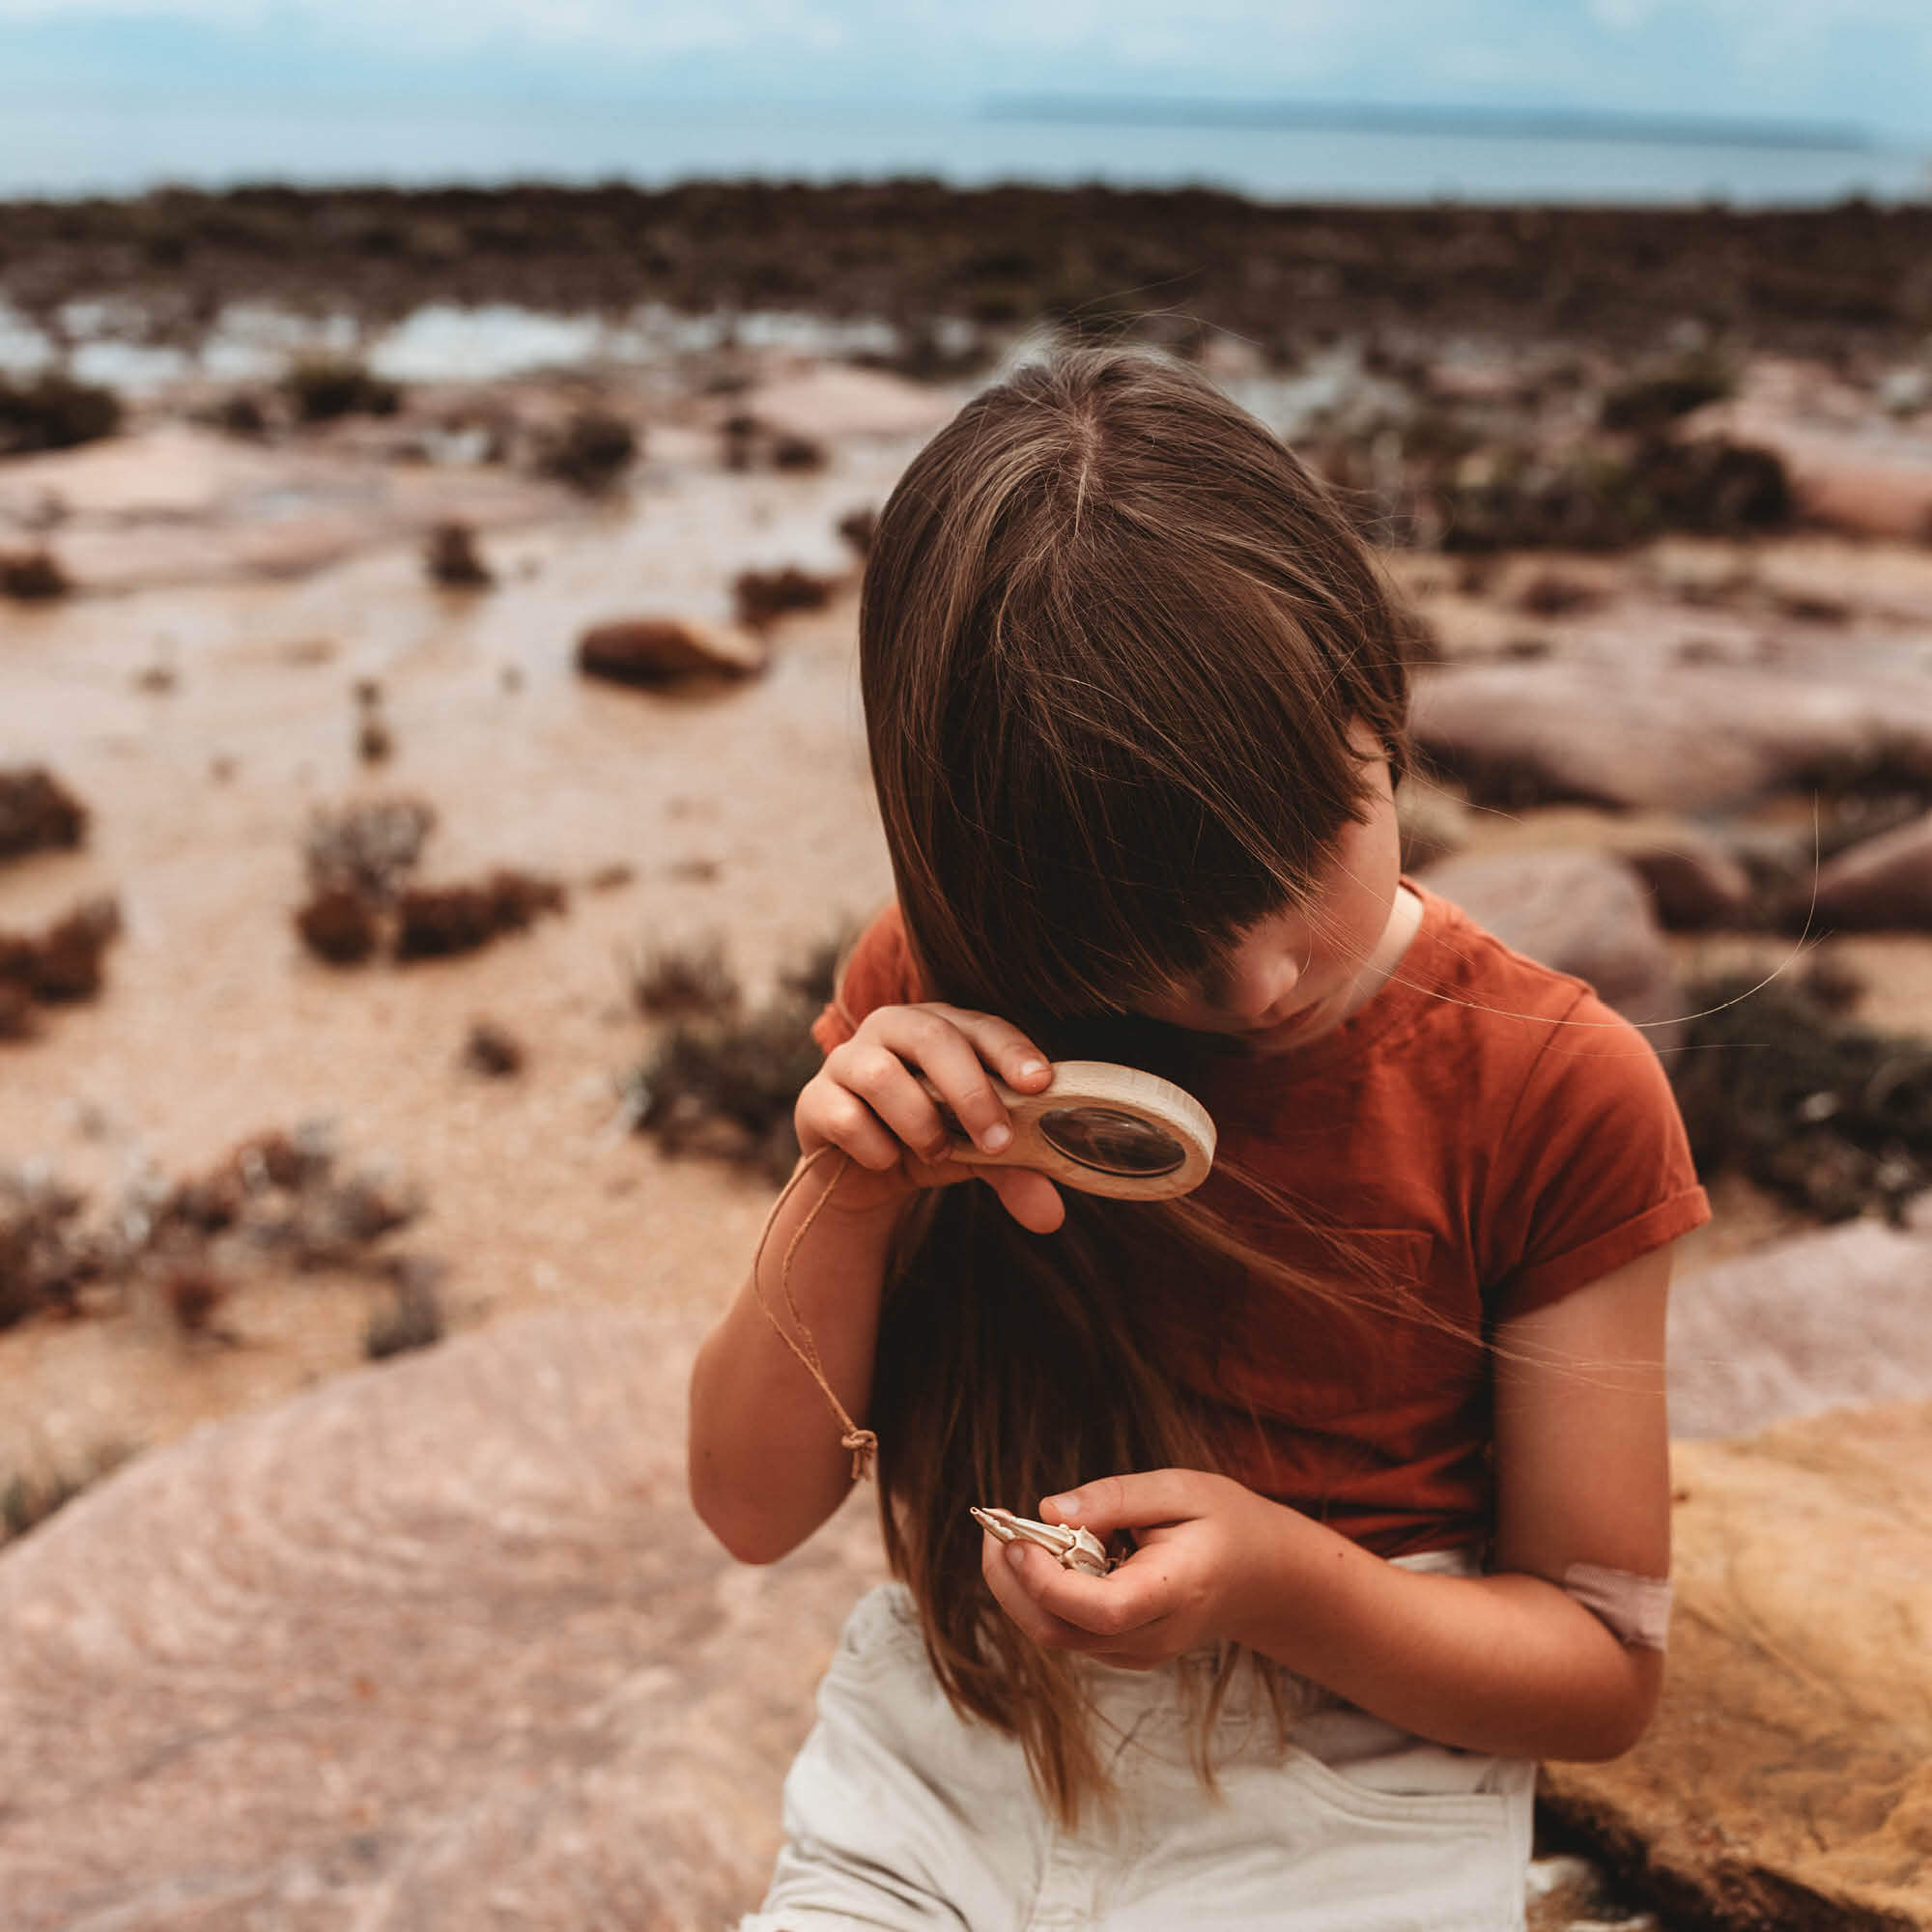 Girl at beach looking at crab claw with a Kikkerland dual magnifier wooden magnifying glass with two lenses for exploring nature and play  from Your Wild Books